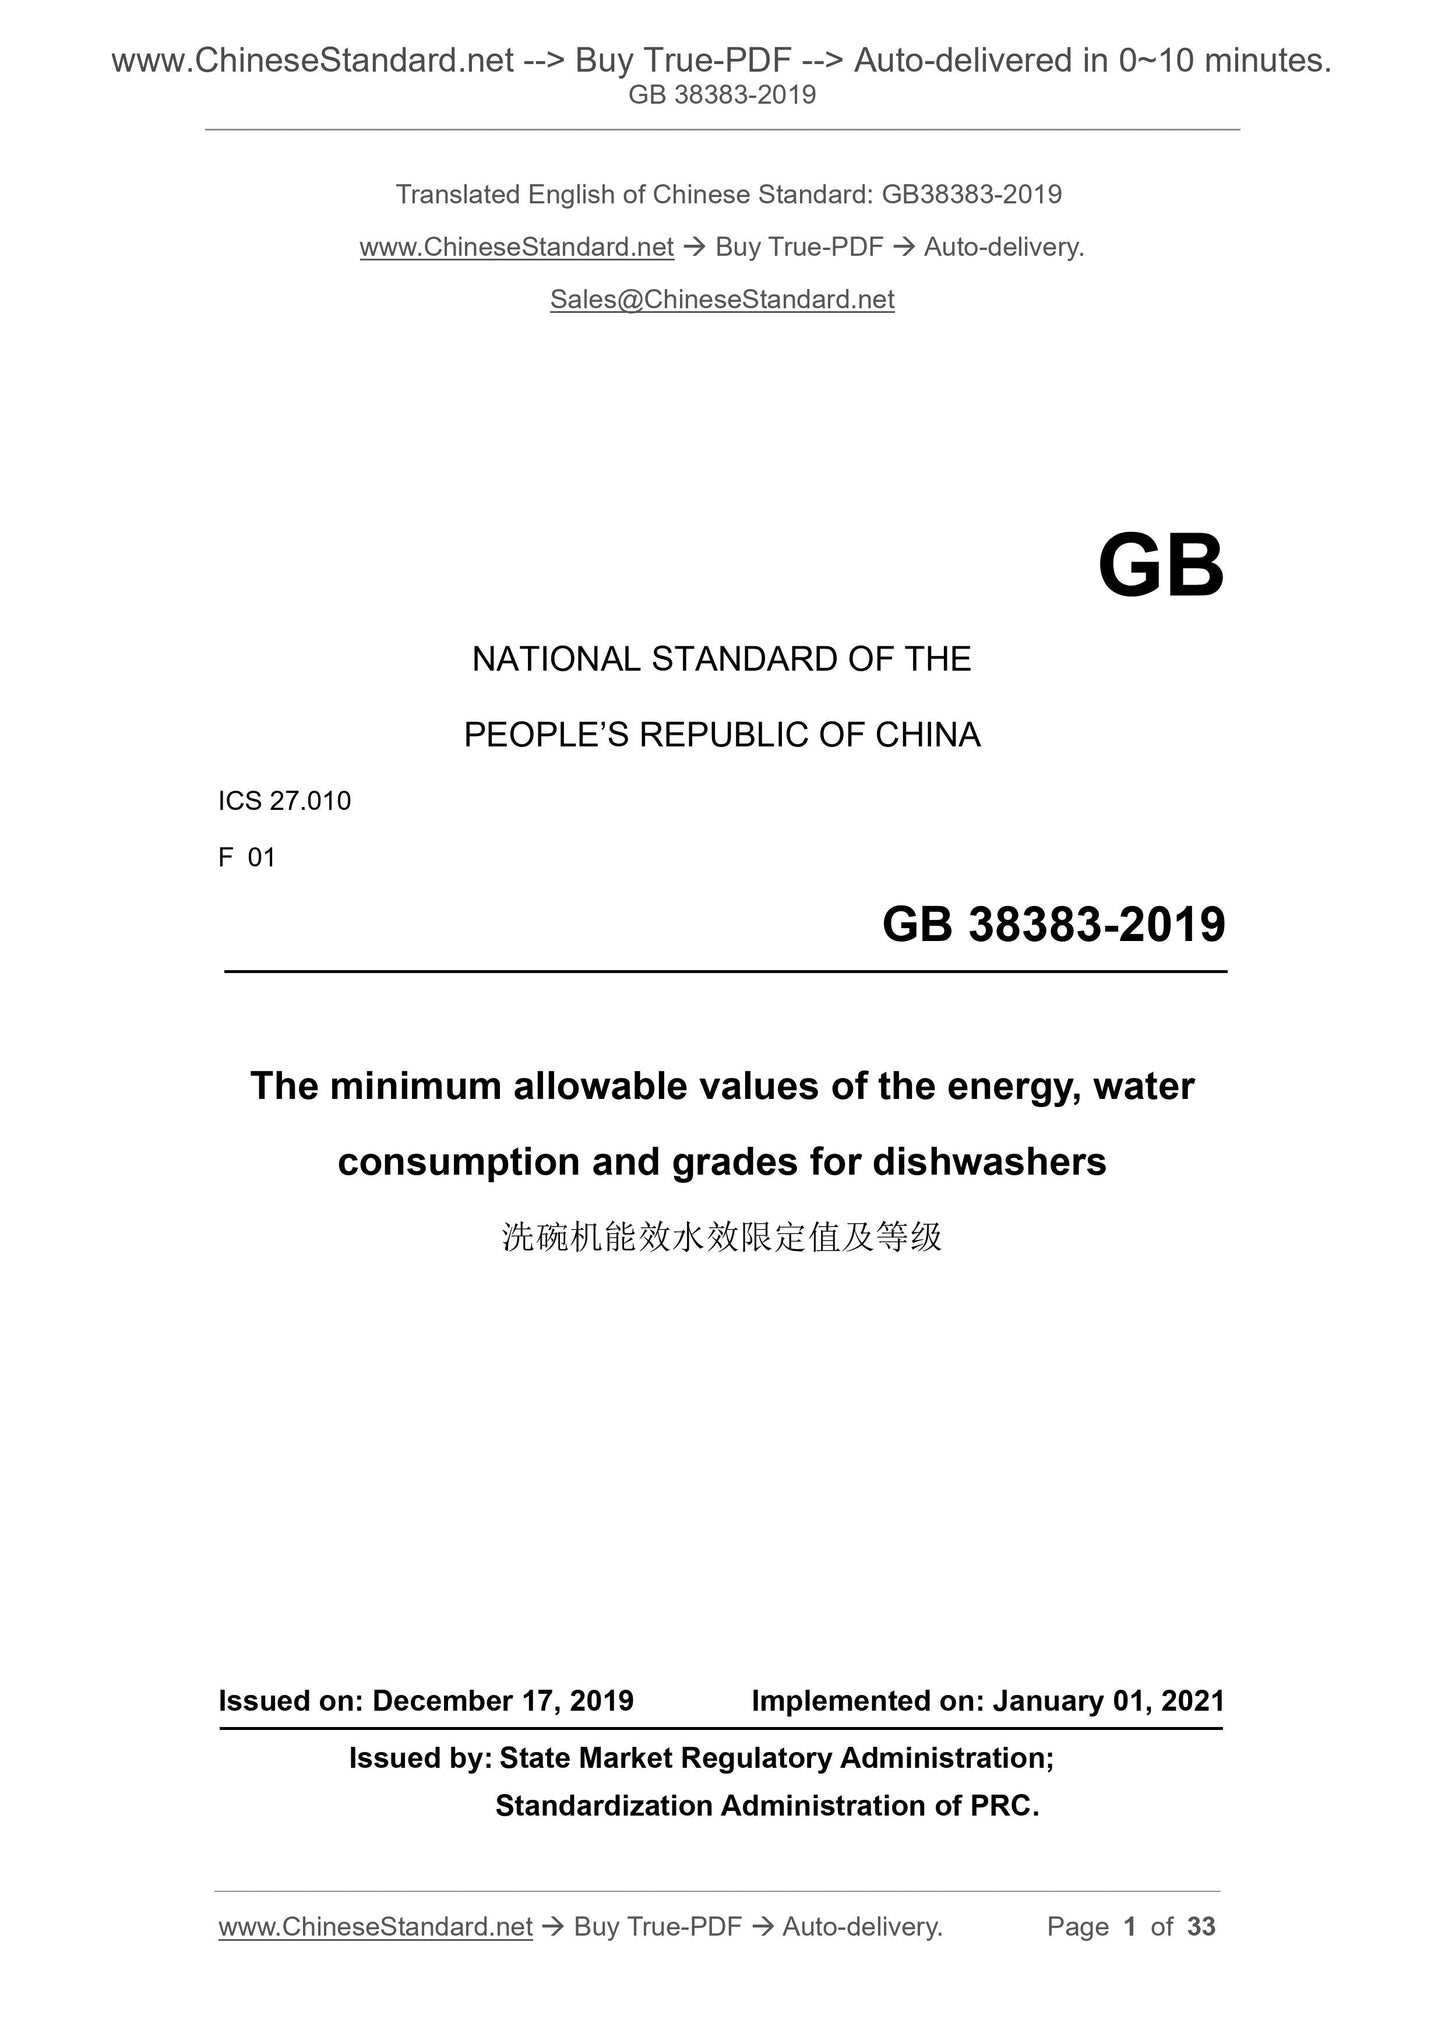 GB 38383-2019 Page 1